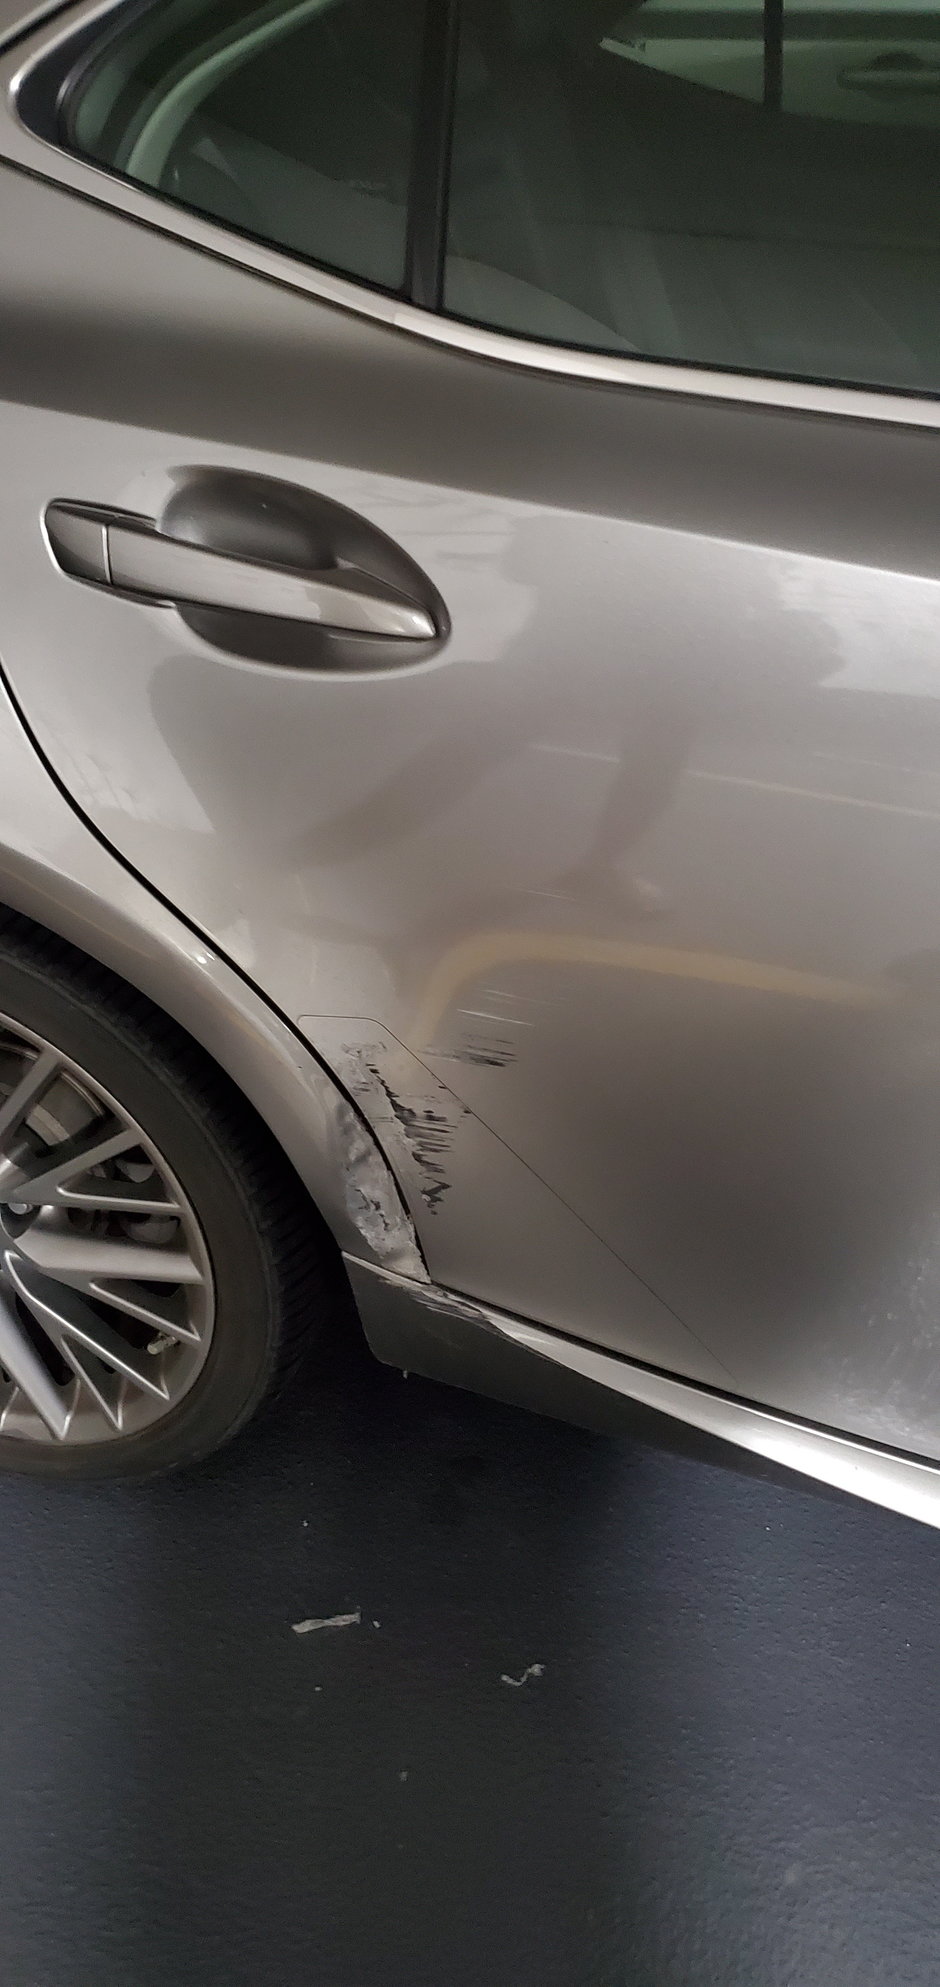 Cost to fix this dent and scratch? - ClubLexus - Lexus Forum